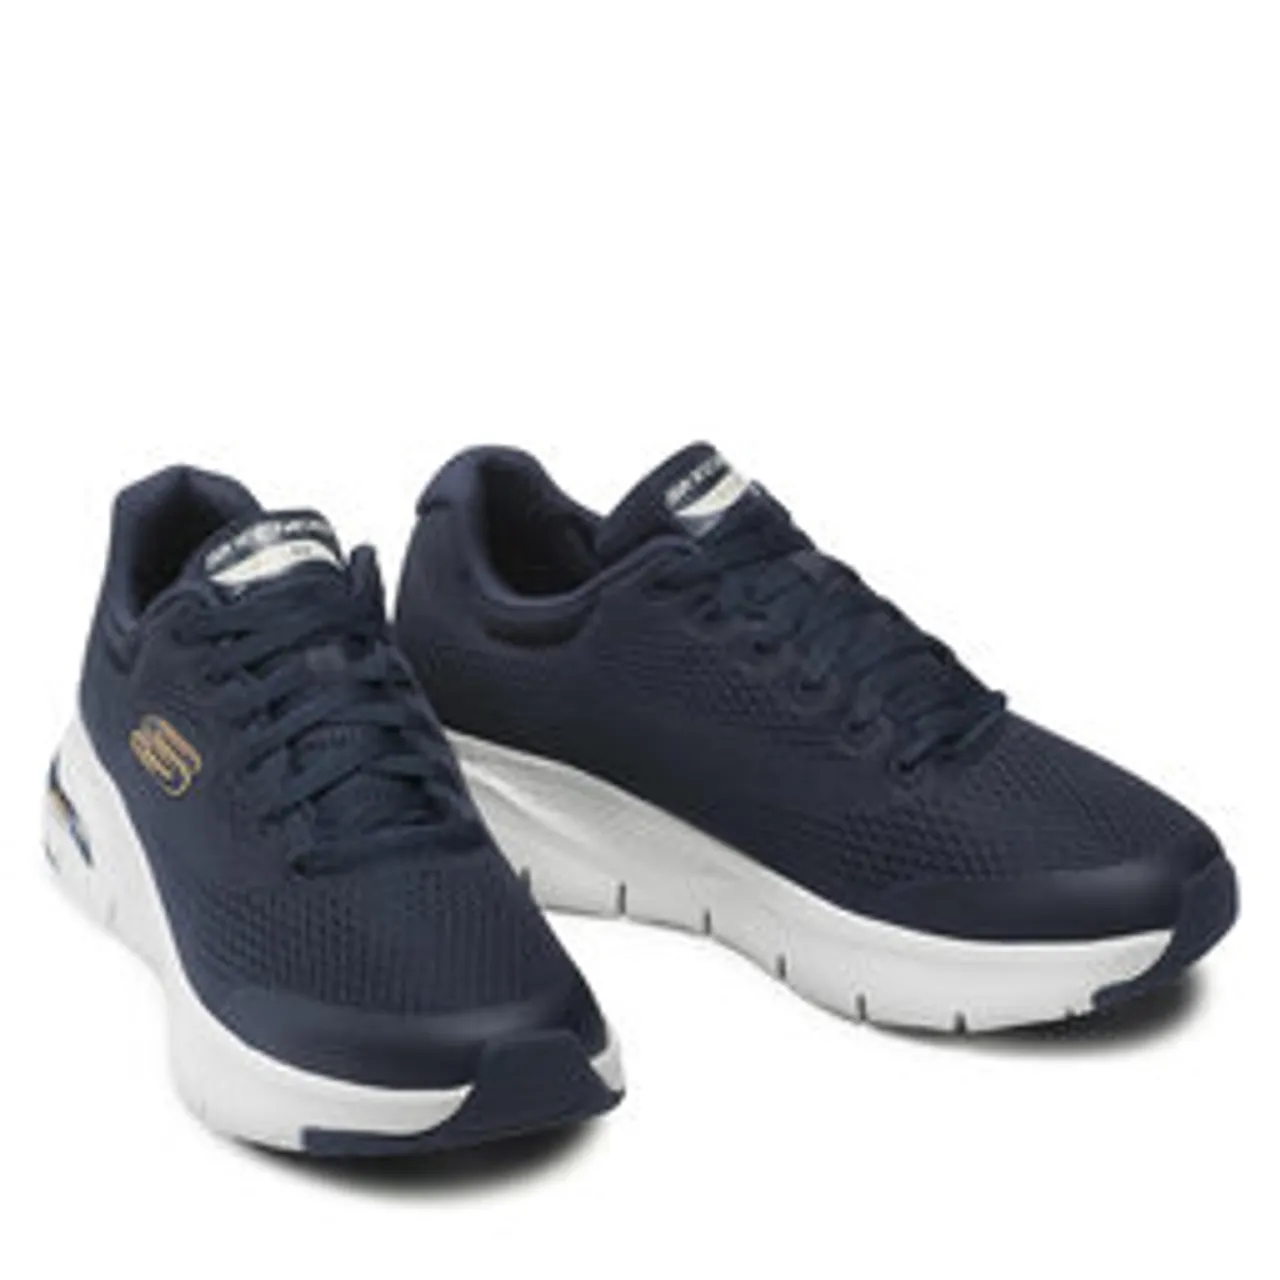 Sneakers Skechers Arch Fit 232040/NVY Navy